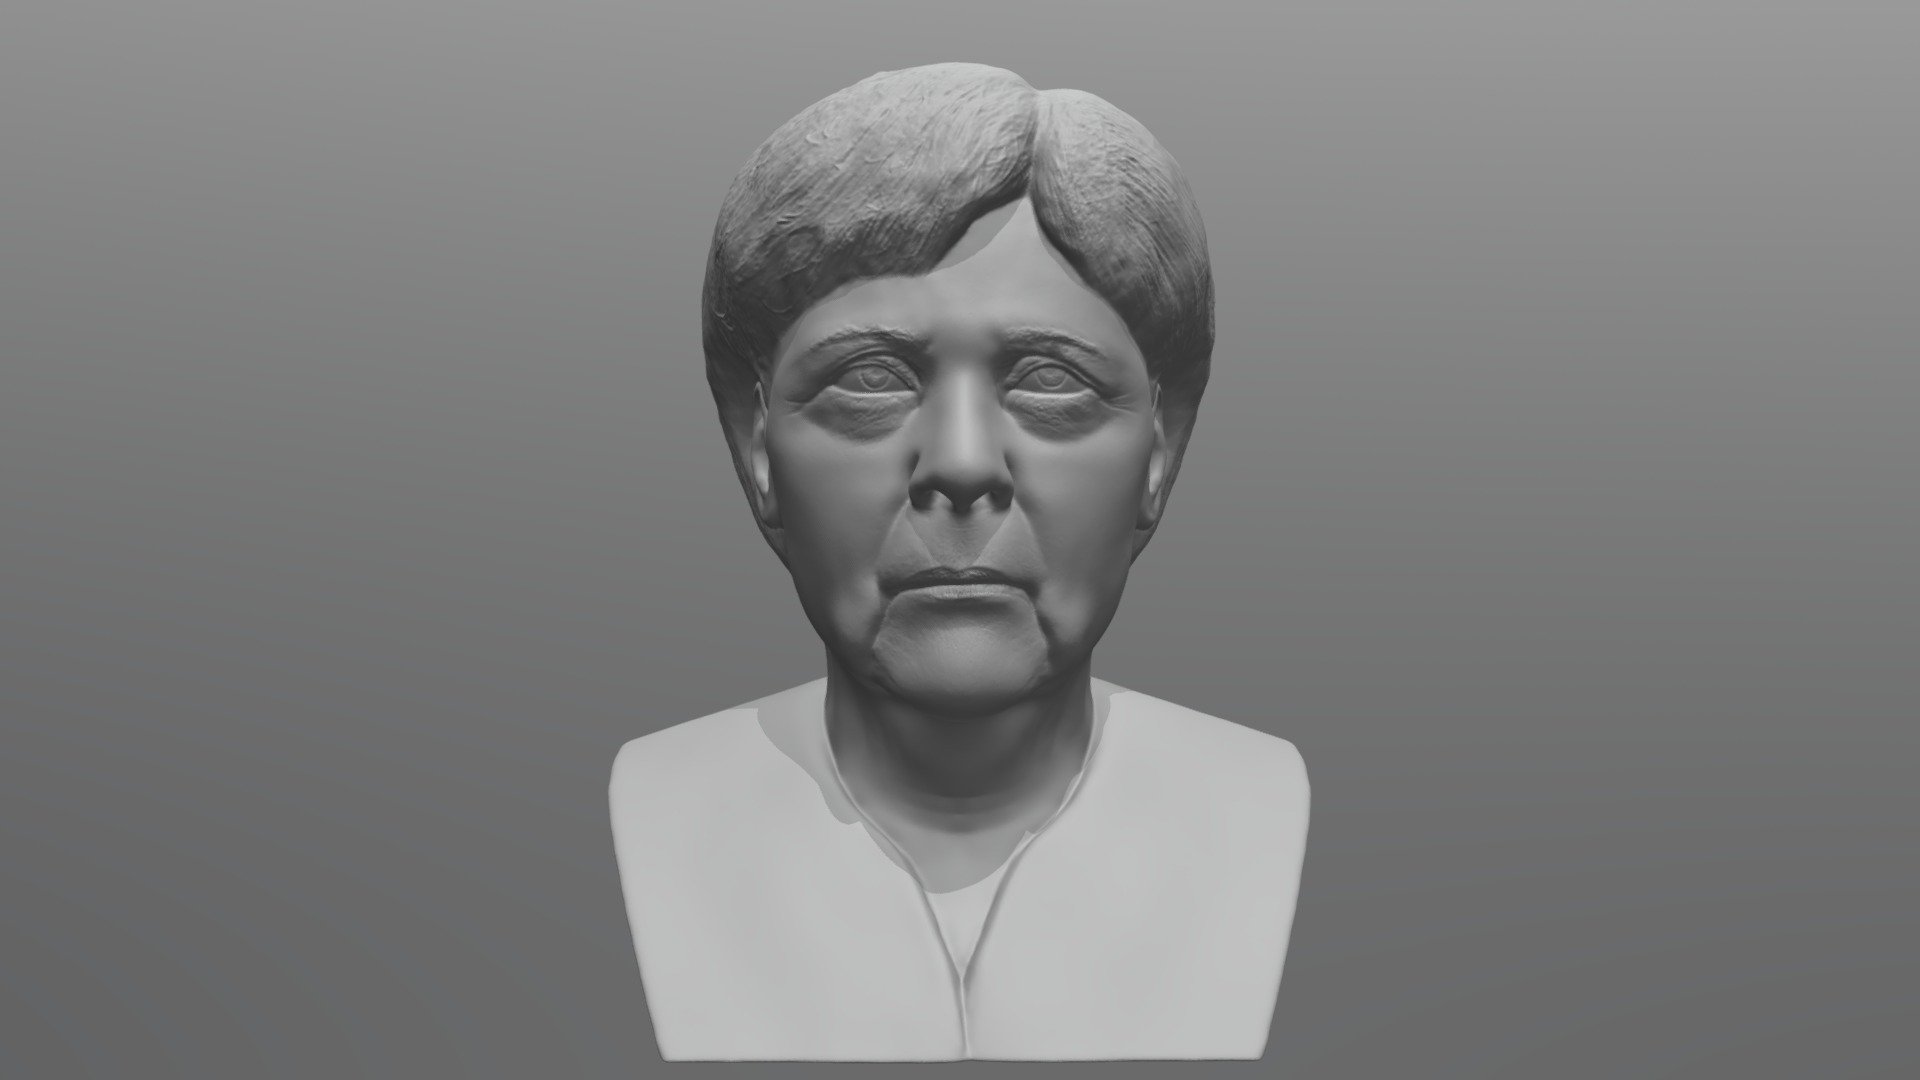 Here is Angela Merkel bust 3D model ready for 3D printing. The model current size is 5 cm height, but you are free to scale it. 
Zip file contains stl. 
The model was created in ZBrush 3d model